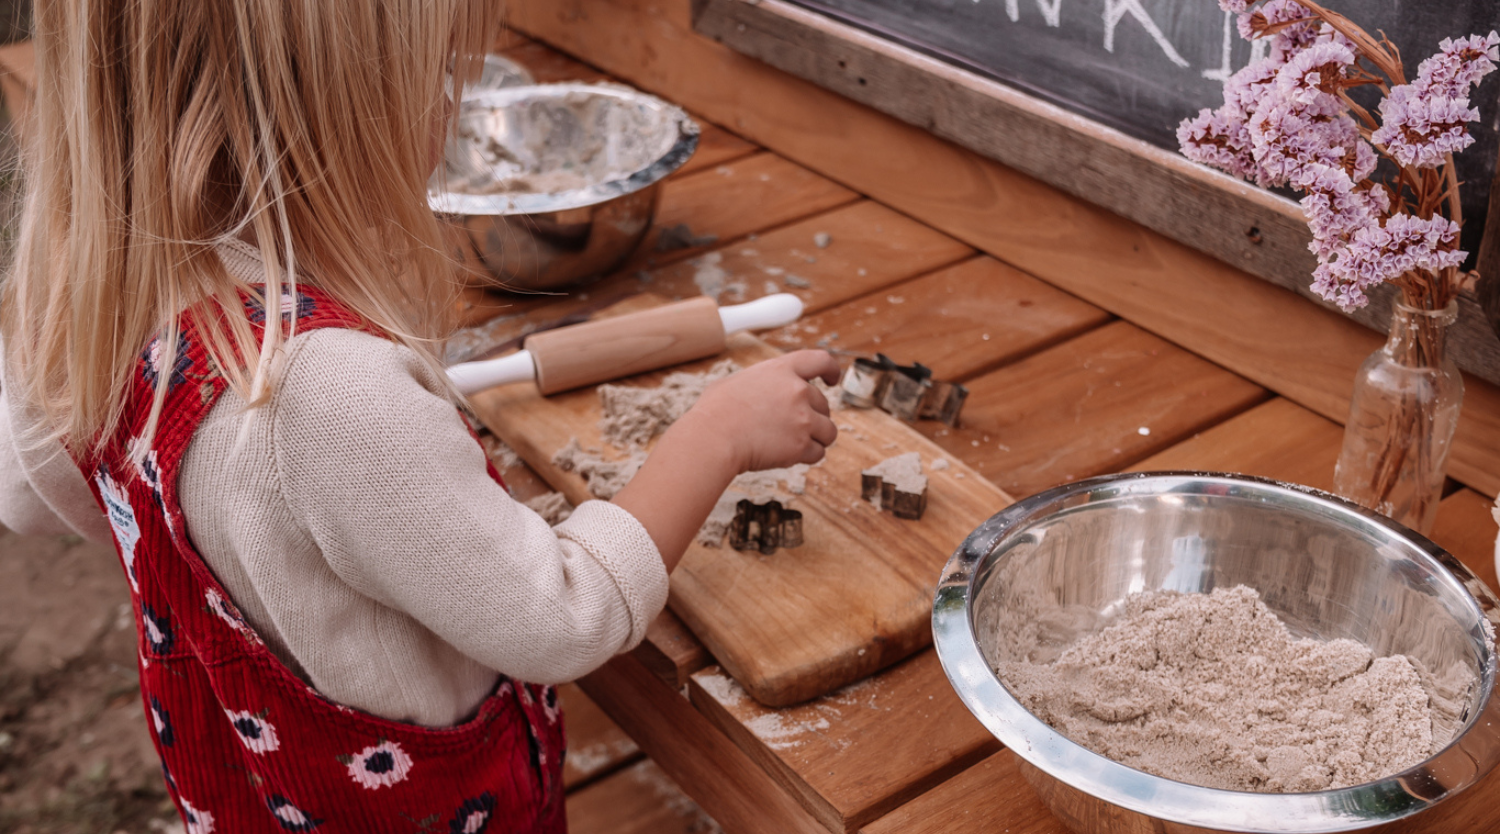 Create, make and play with a mud kitchen